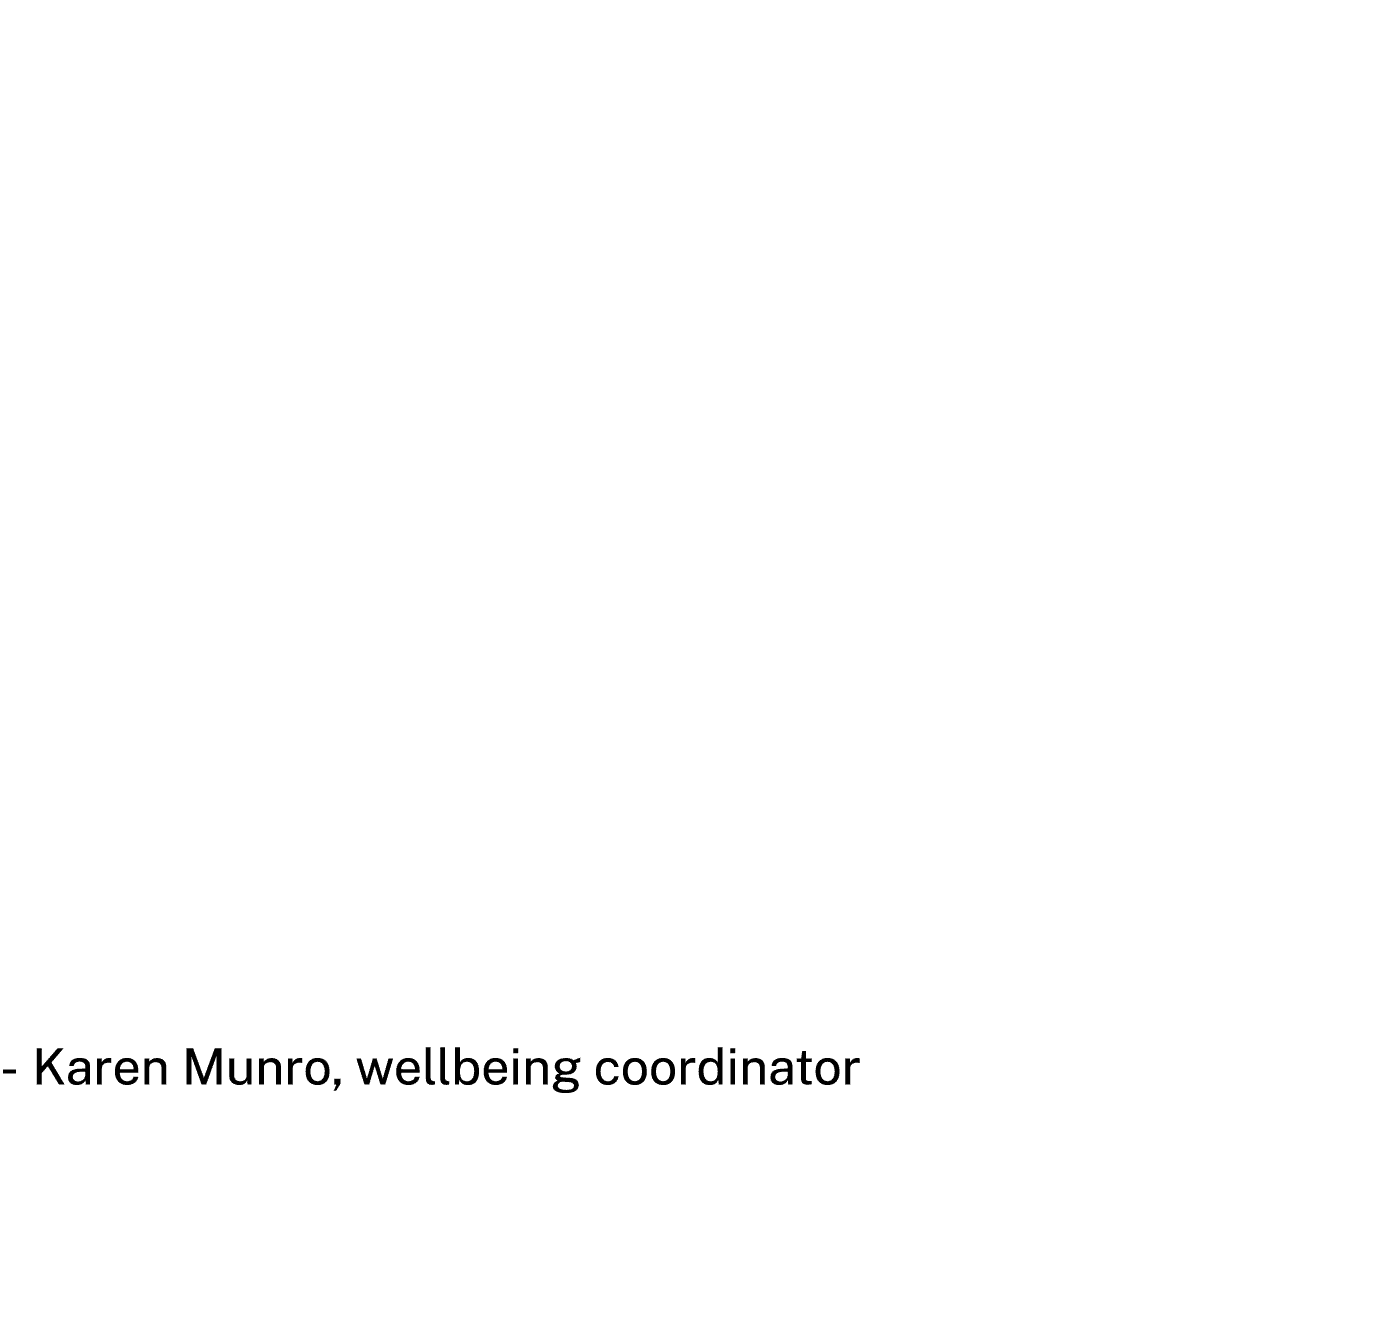 “The grant was used to purchase the shed and fruits and vegetable seedlings, which has reinvigorated the school garde...